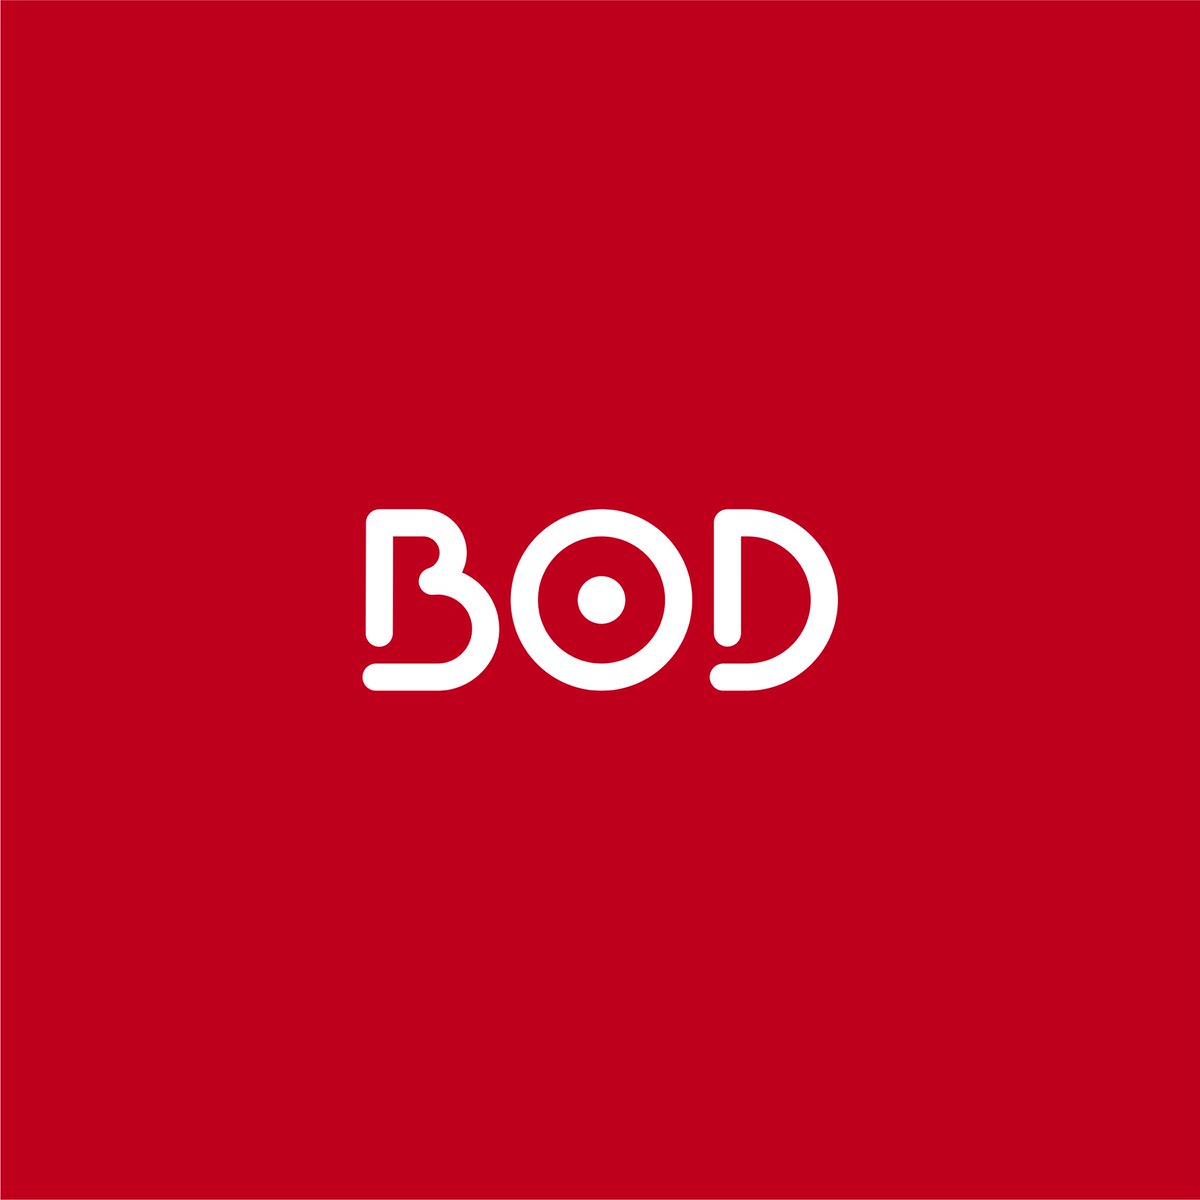 Good Morning !! 
 After careful consideration ApparelbyBOD has decided to merge with his sister company Pocketfit.ng . Please follow us on our business page @BOD__NG

Please RT